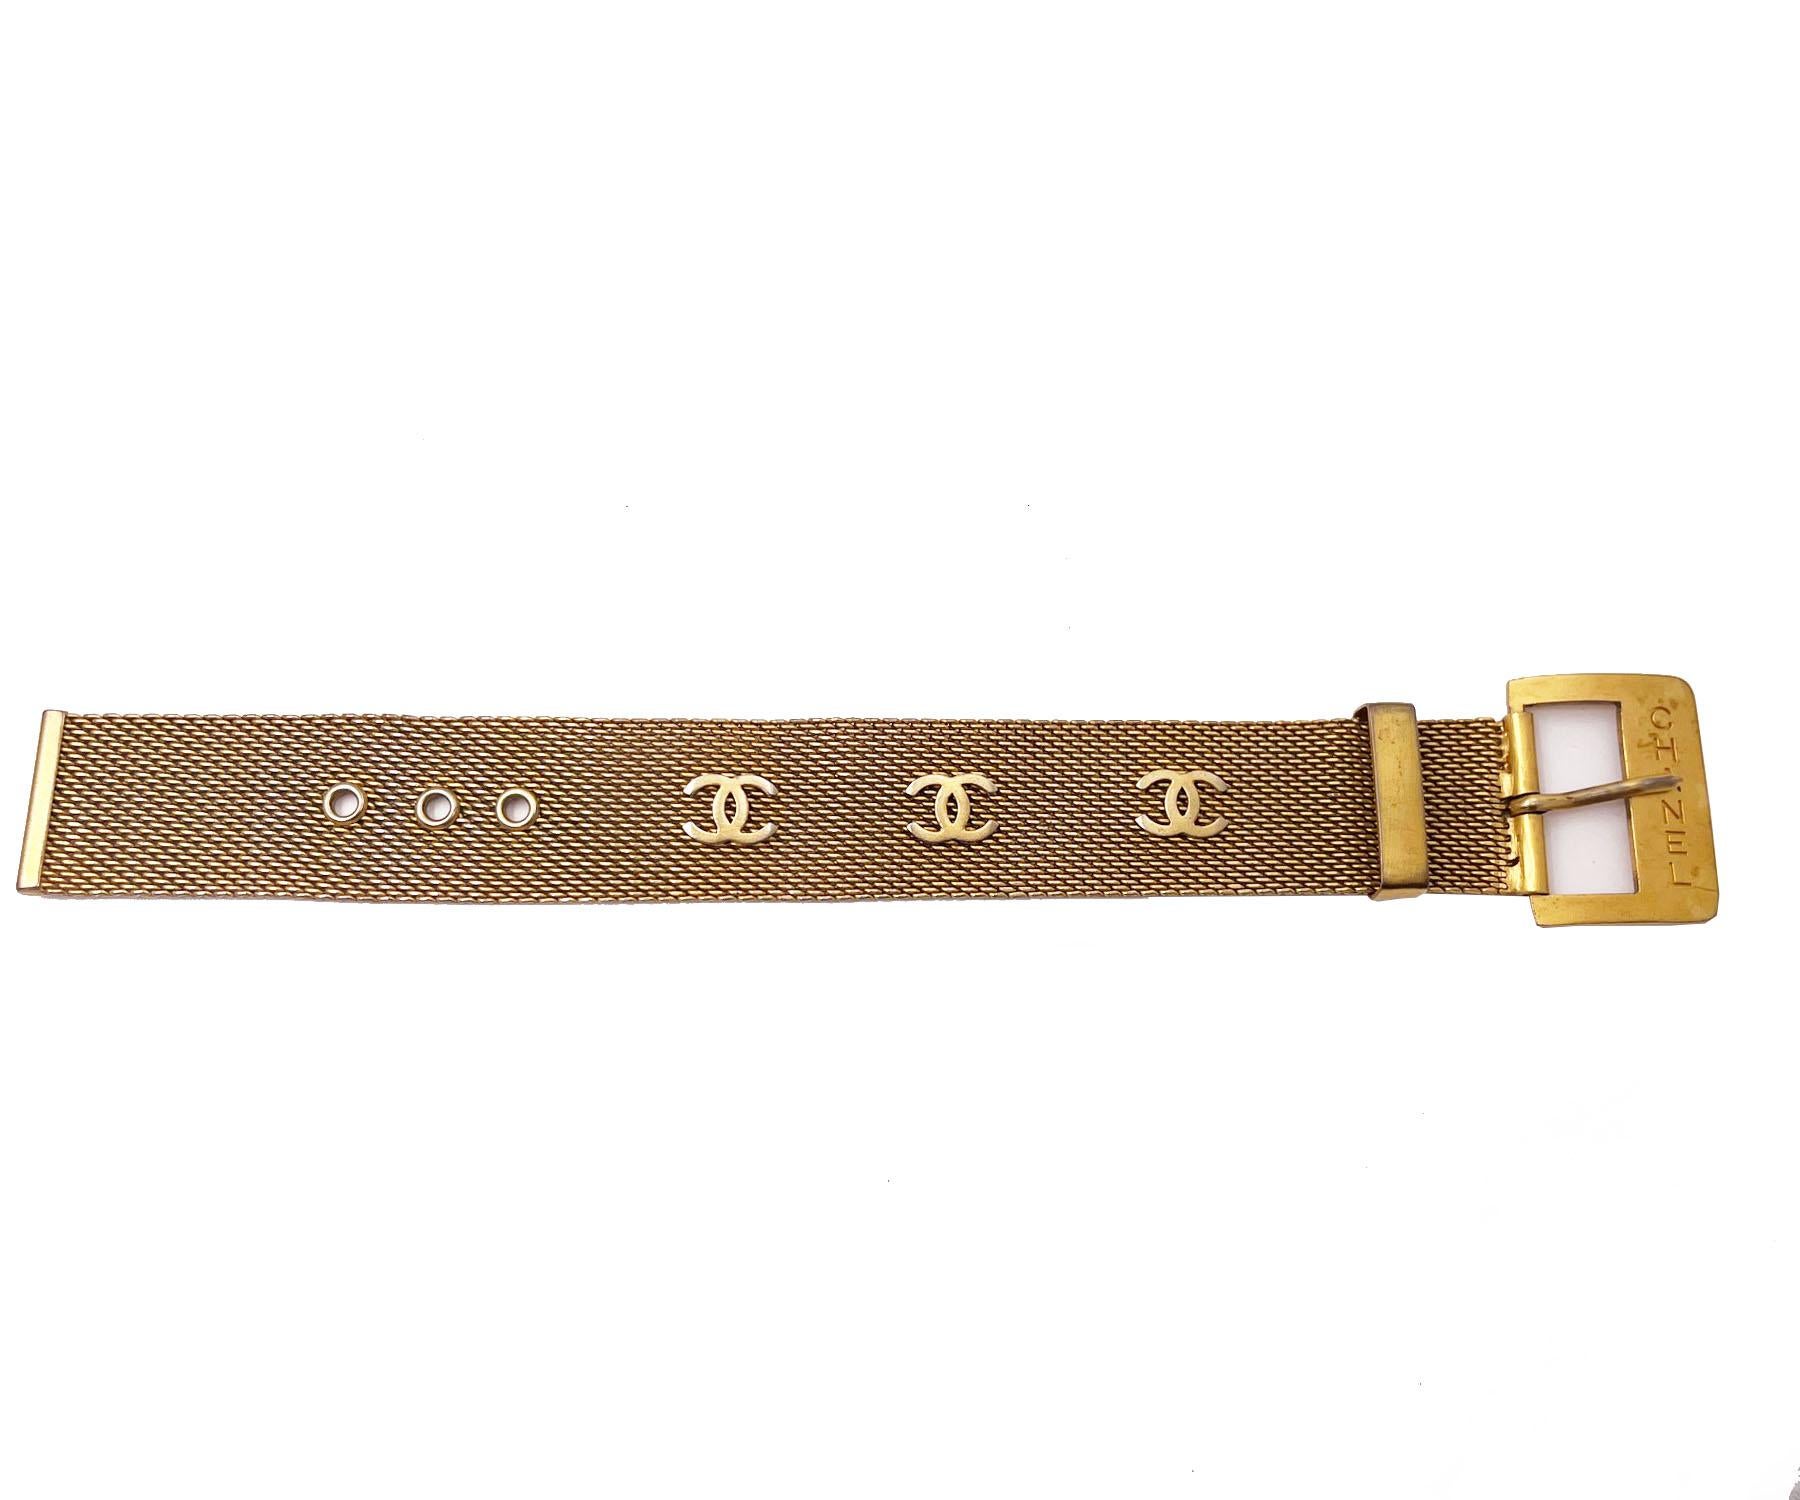 Chanel Rare Vintage Gold Plated CC Mesh Belt Bracelet 

*Marked 95
*Made in France
*Comes with the original box

-It is approximately 6